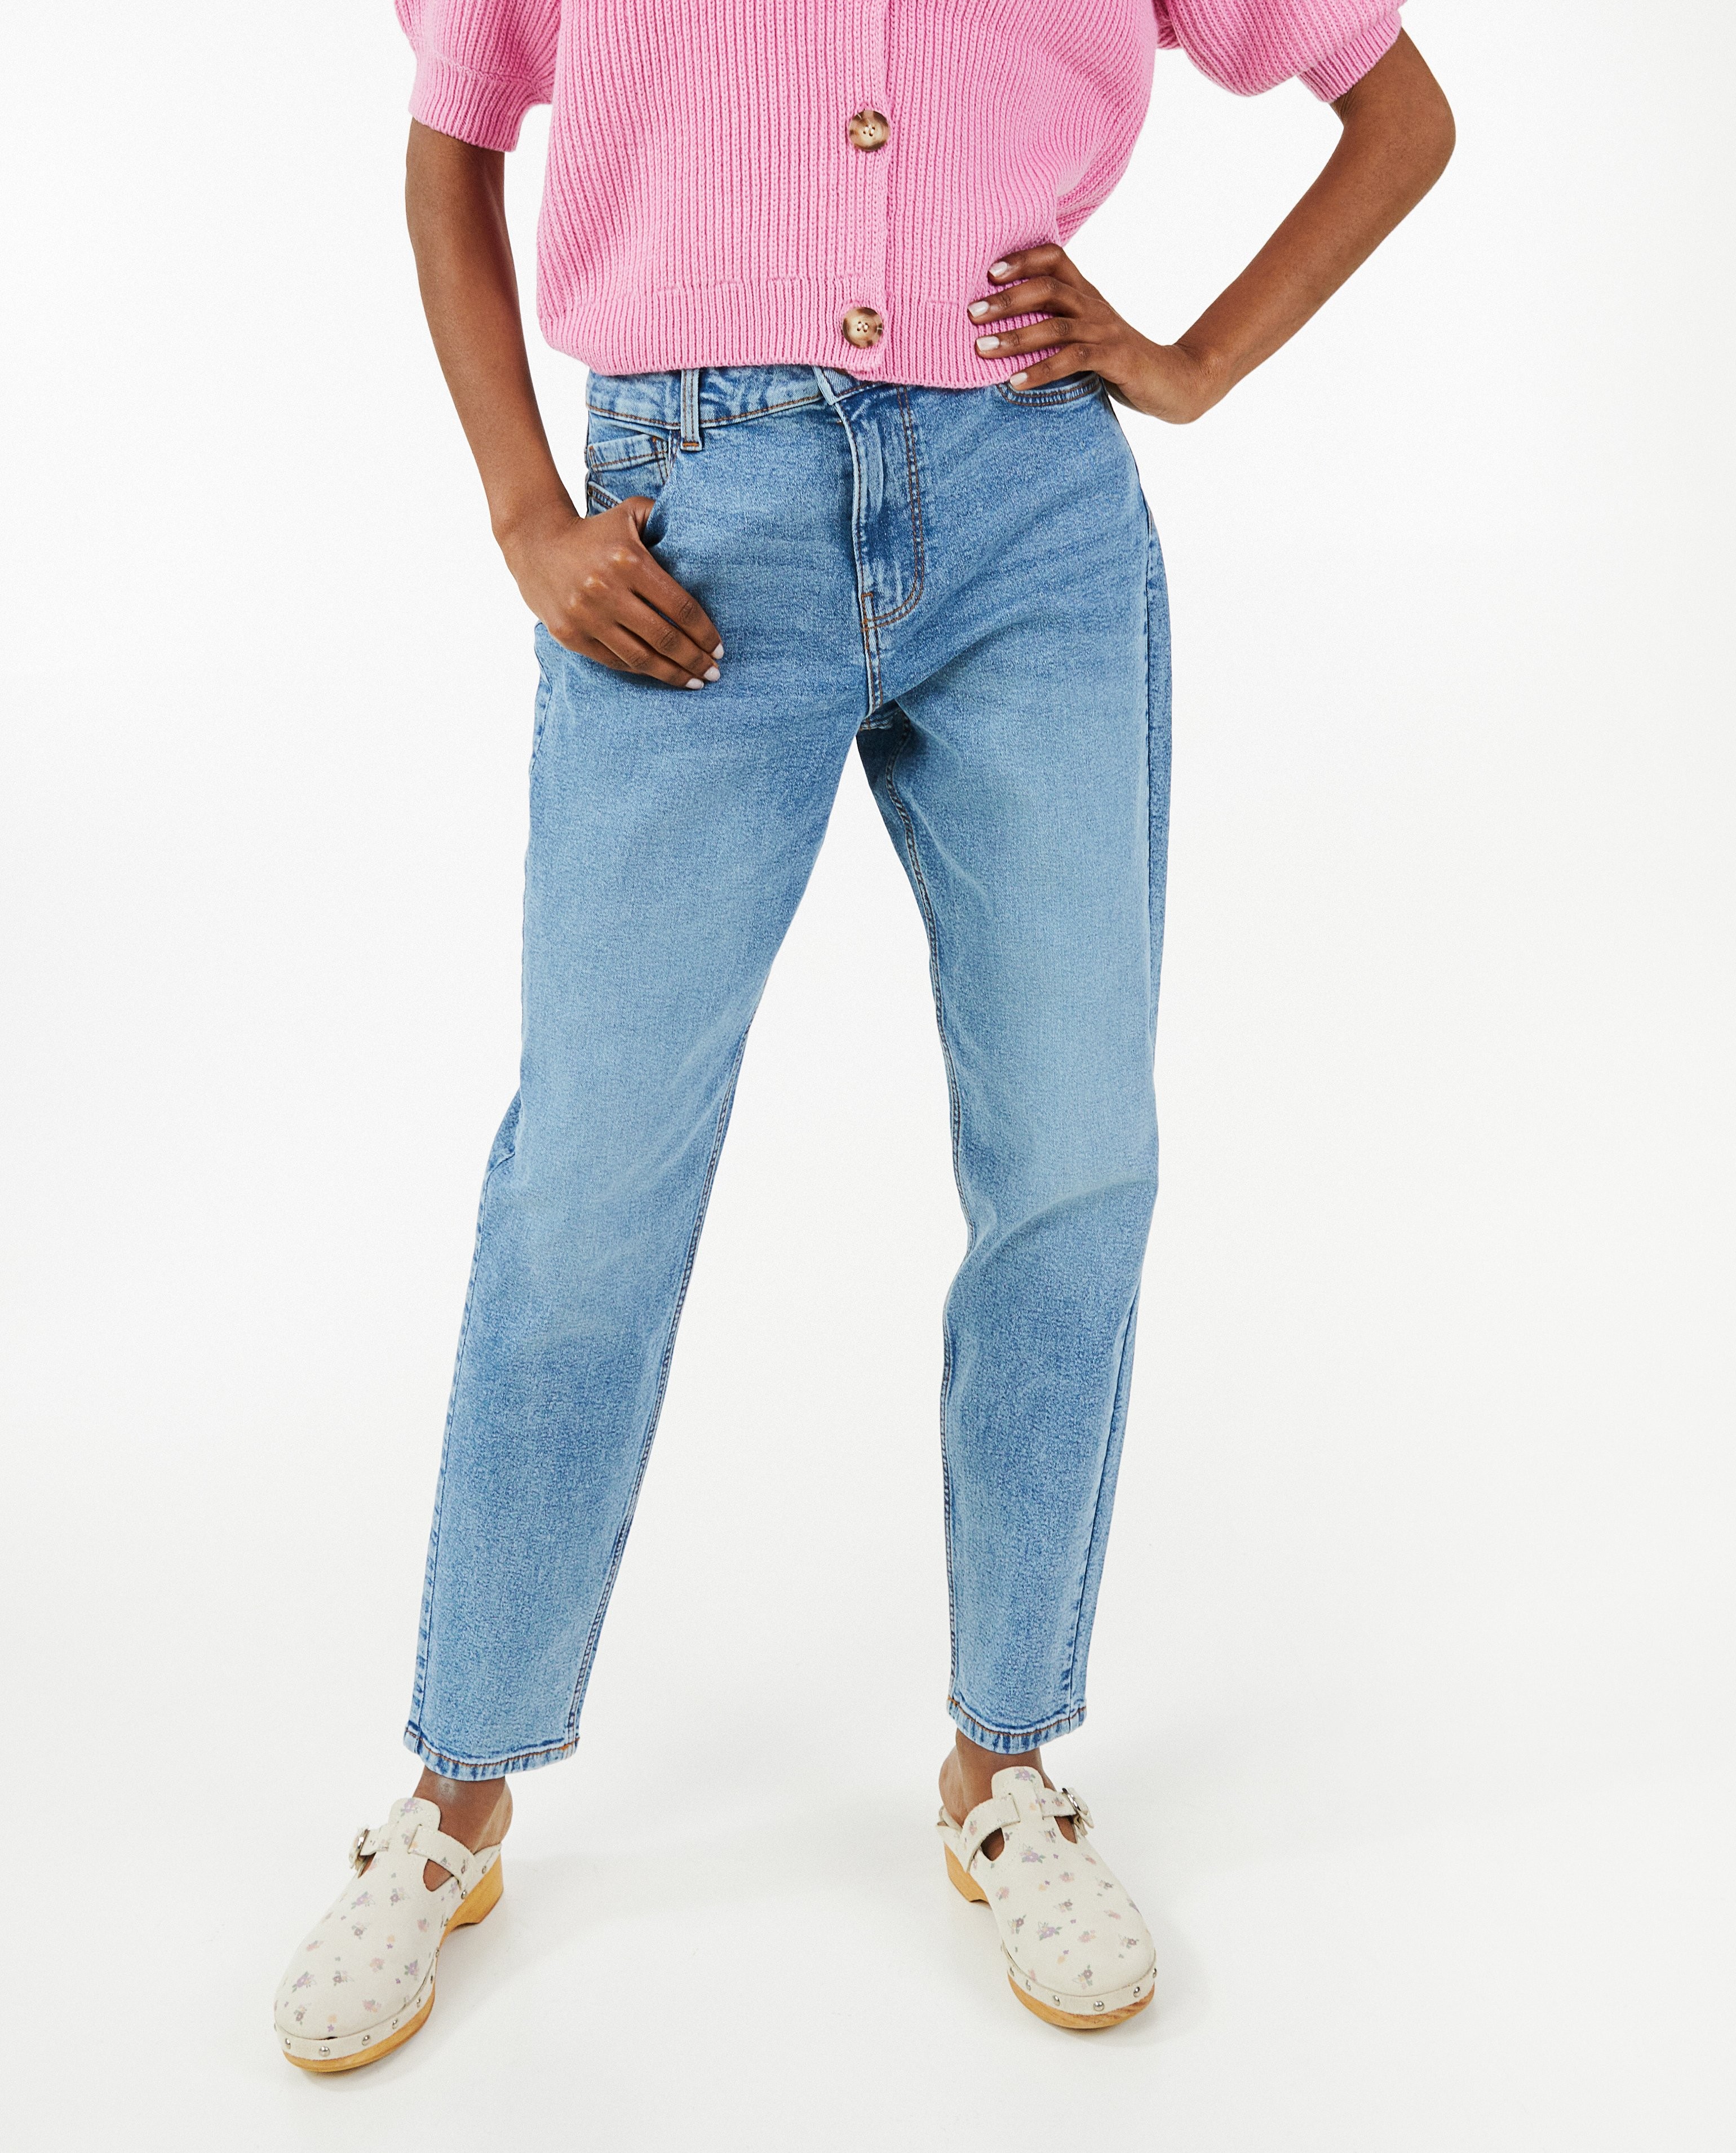 Jeans - Jeans bleu, coupe mom